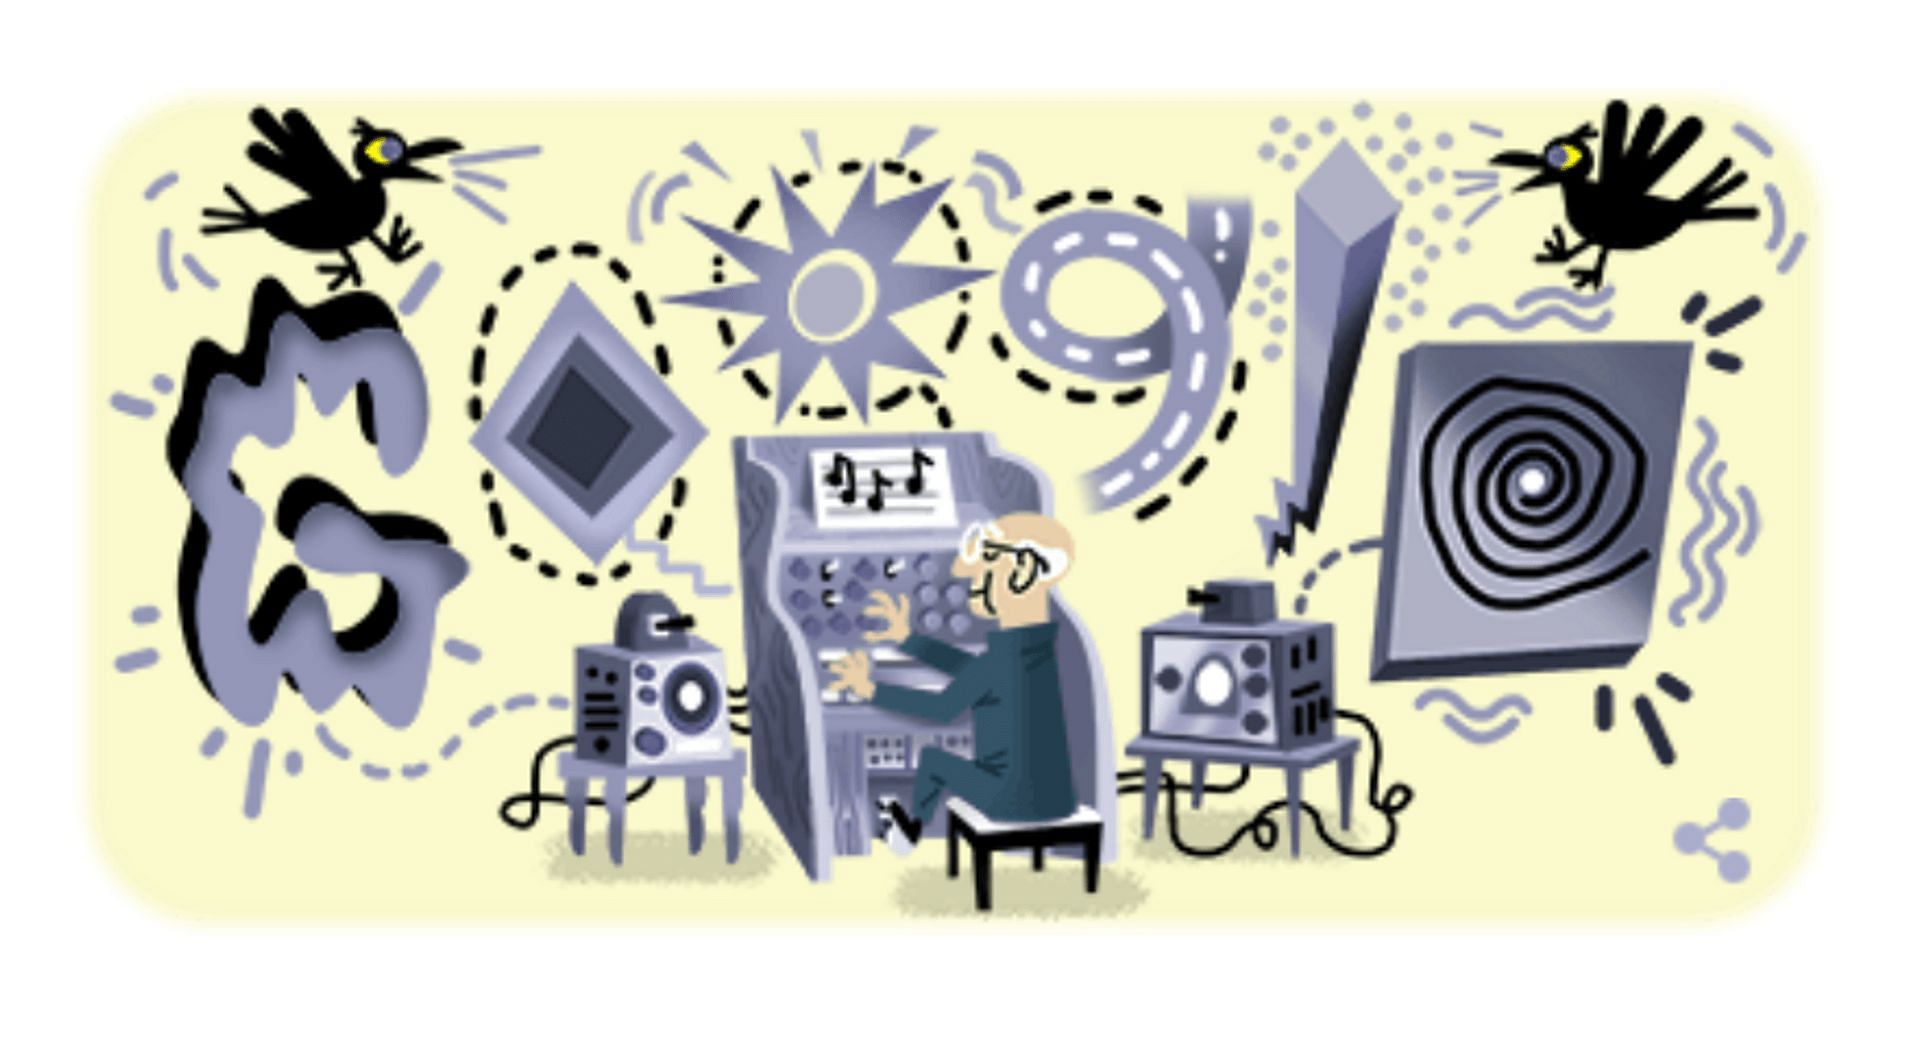 Oskar Sala would have been 112 years old today; Google honors his birthday through a doodle (Image via Google Doodle)